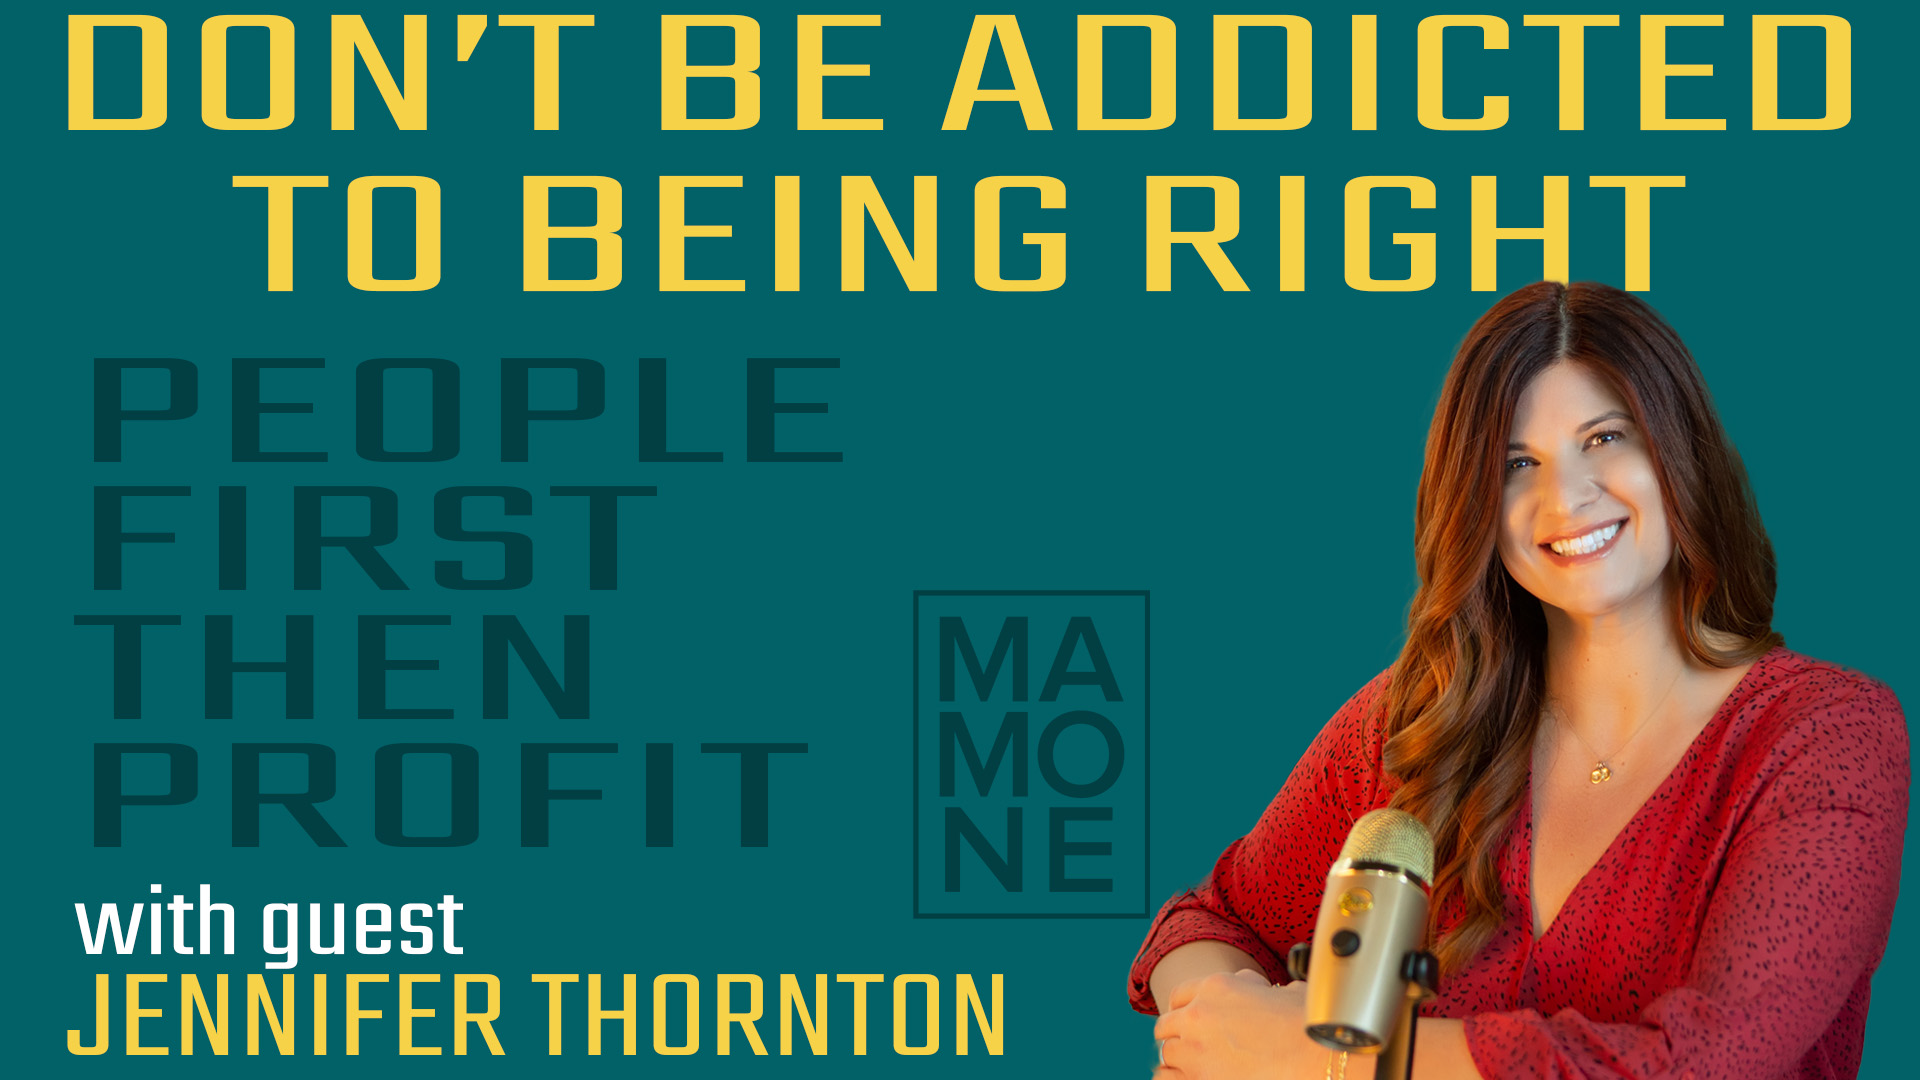 Ep. 3.13 | Don’t Be Addicted to Being Right with Jennifer Thornton